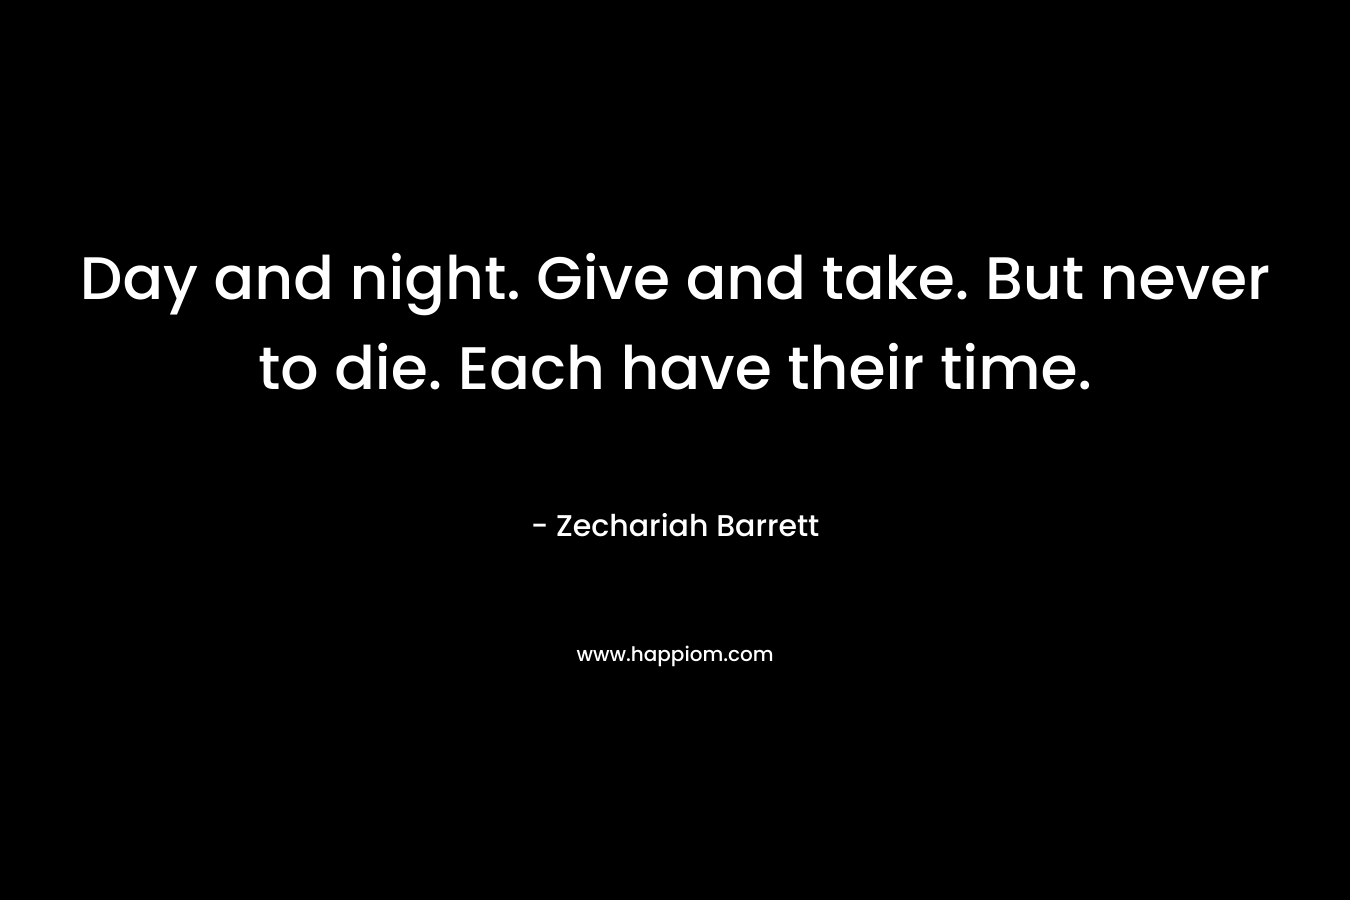 Day and night. Give and take. But never to die. Each have their time. – Zechariah Barrett